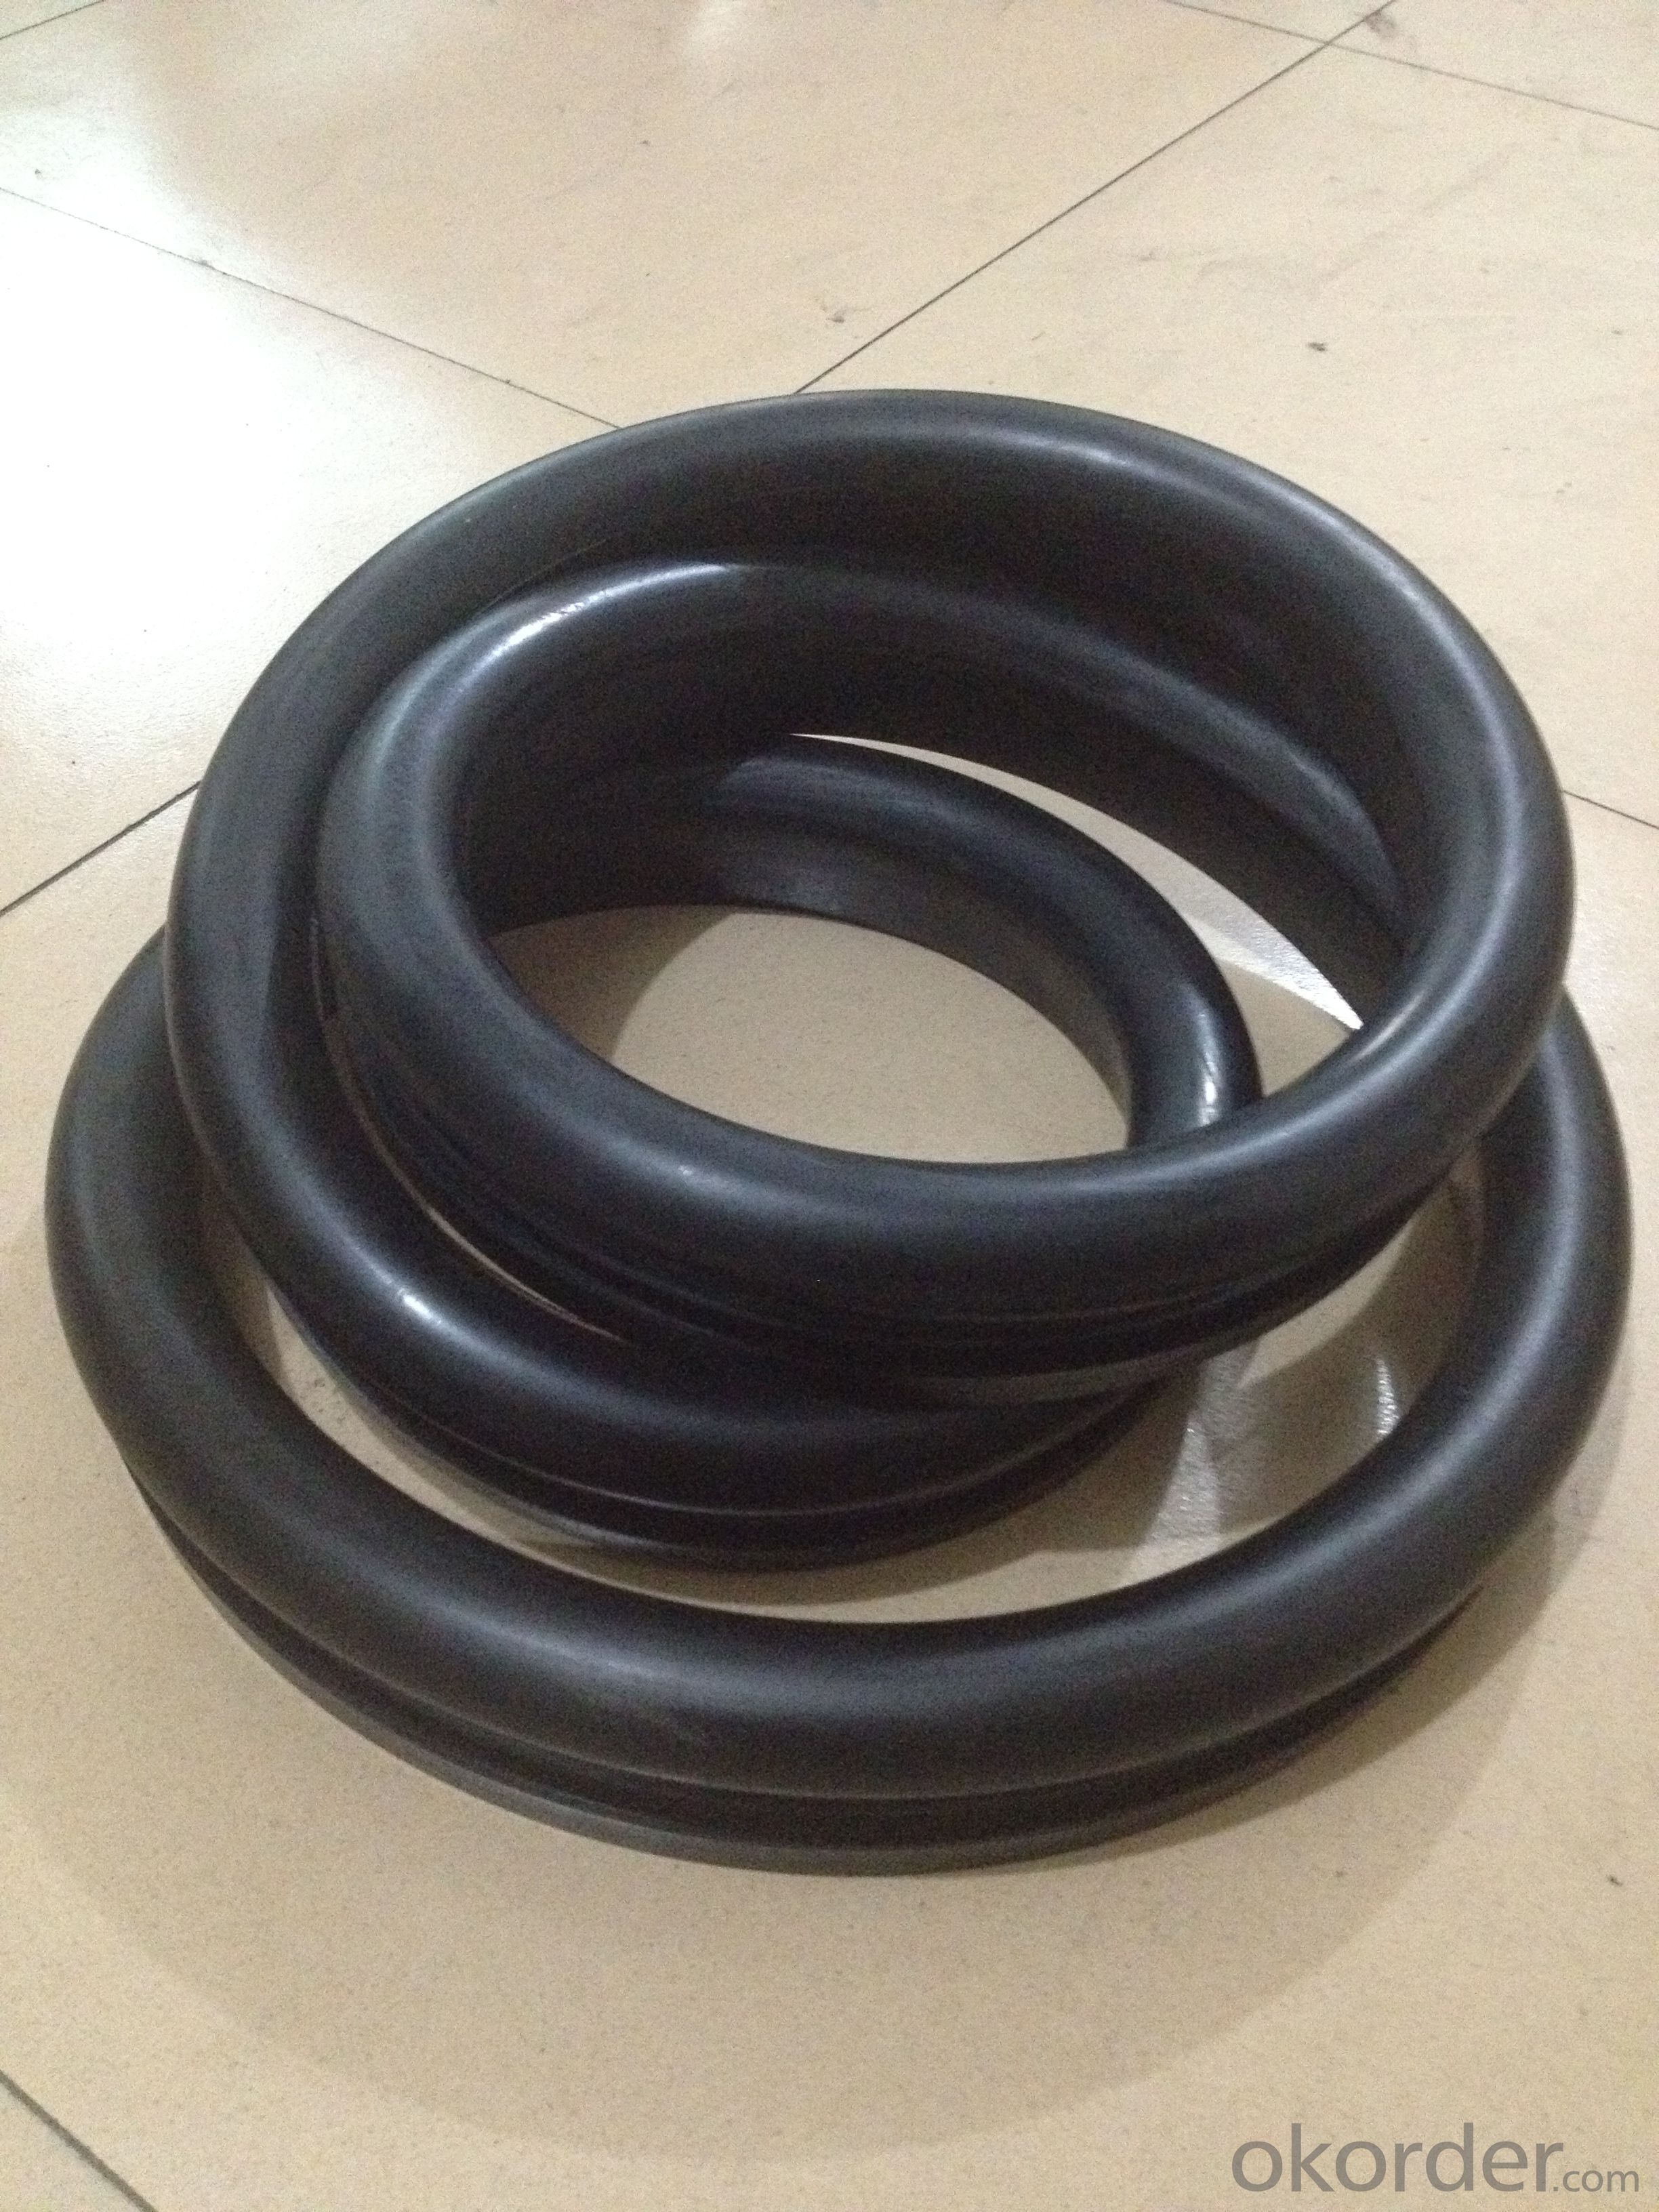 Gasket SBR Rubber Ring DN1100 Made in China on Sale